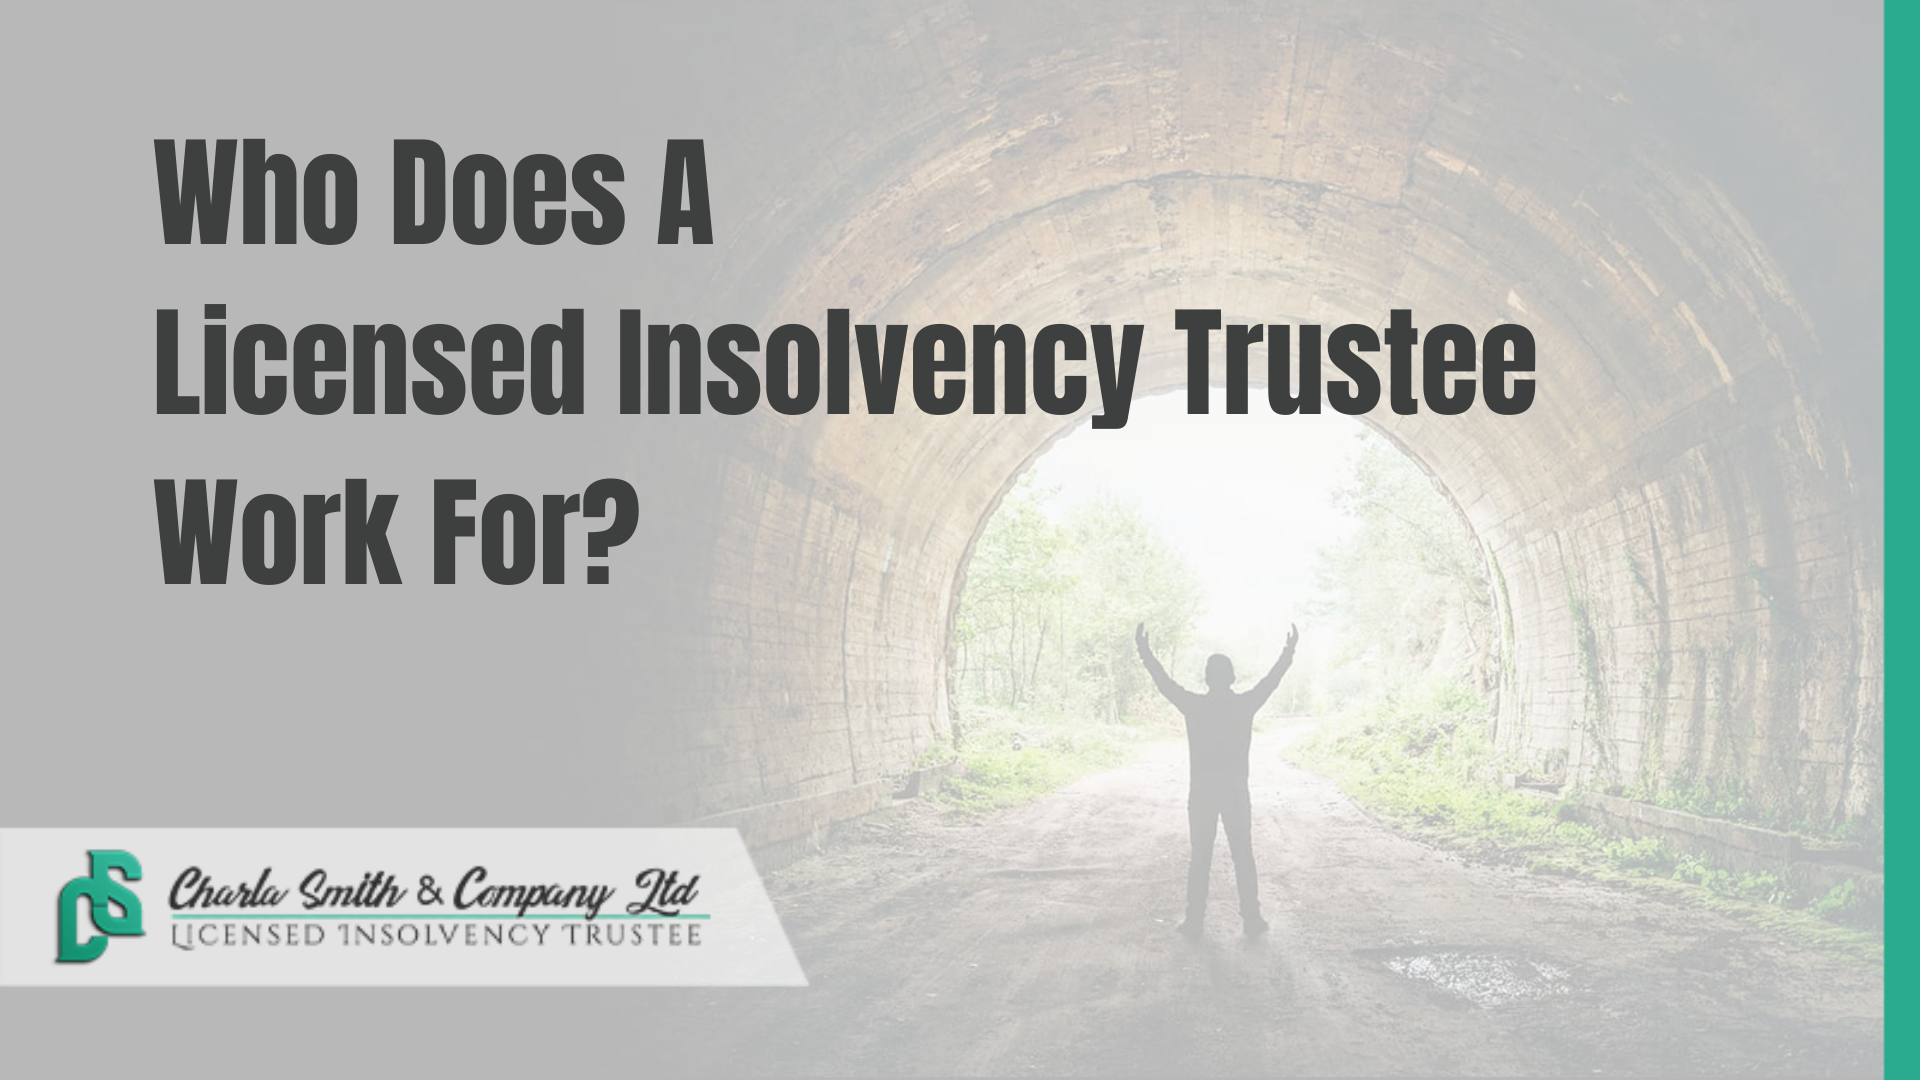 Who Does A Licensed Insolvency Trustee Work For?